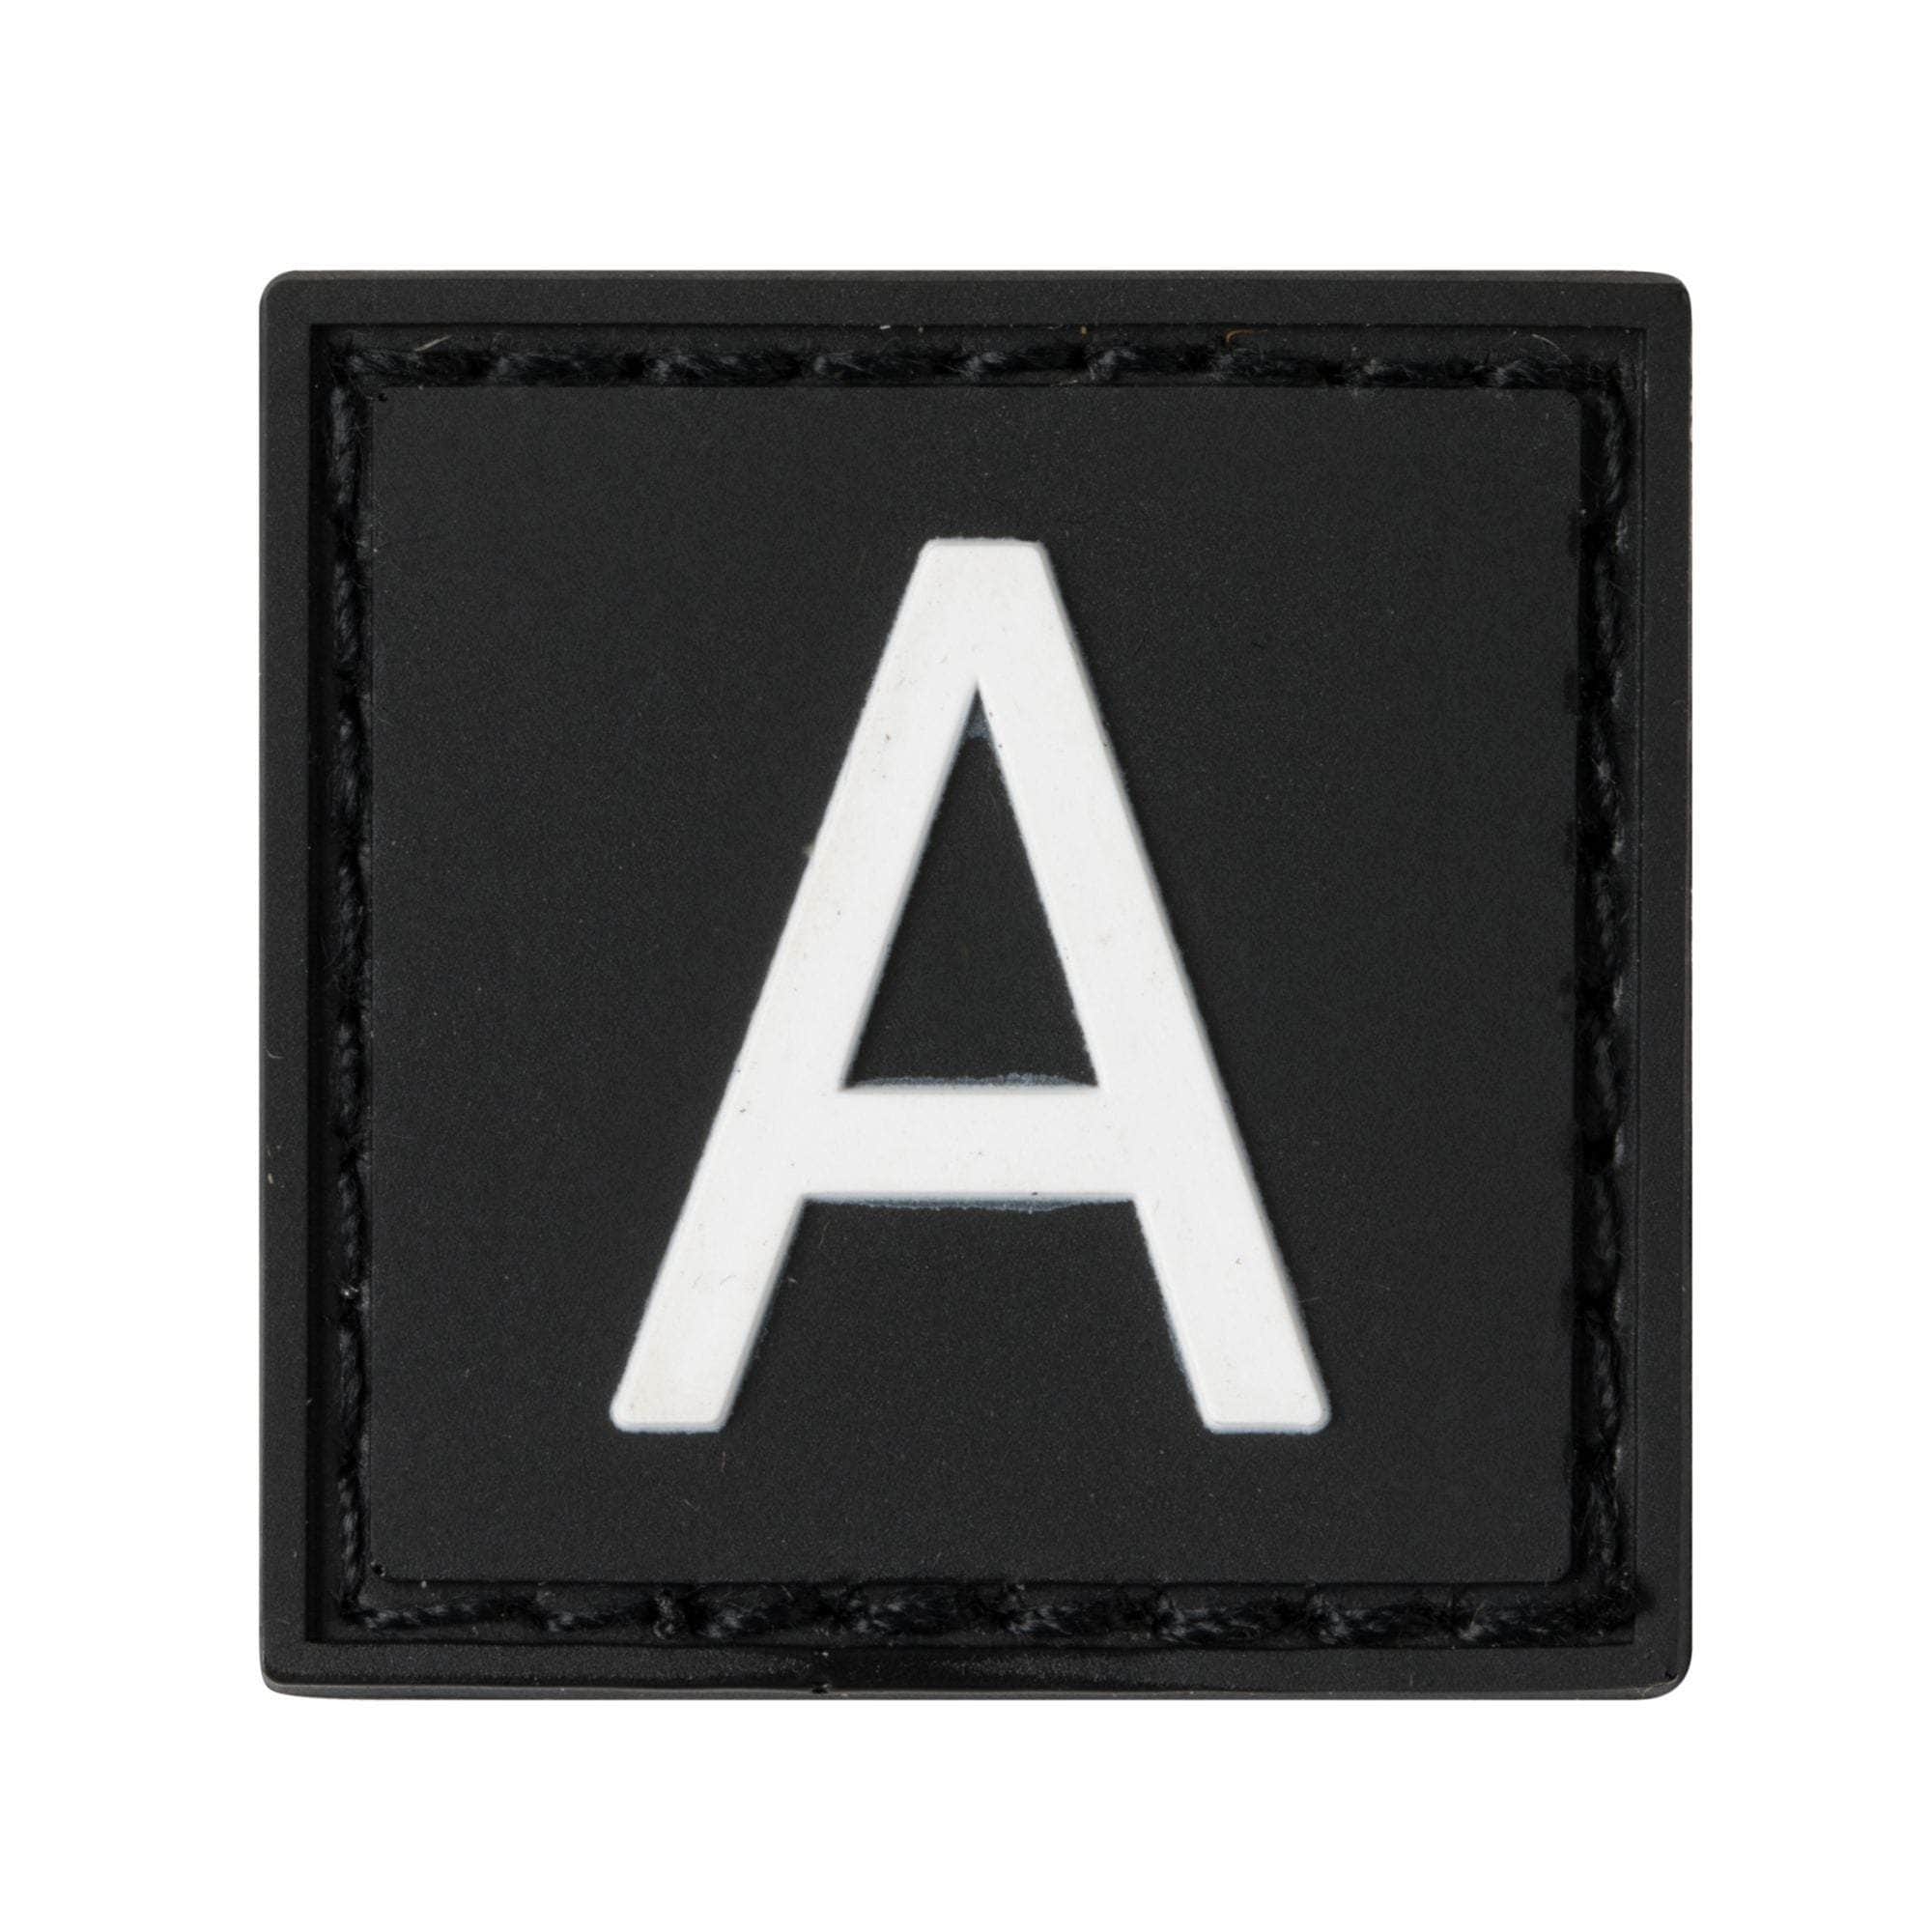 Built for Athletes Patches A Letter Rubber Patches